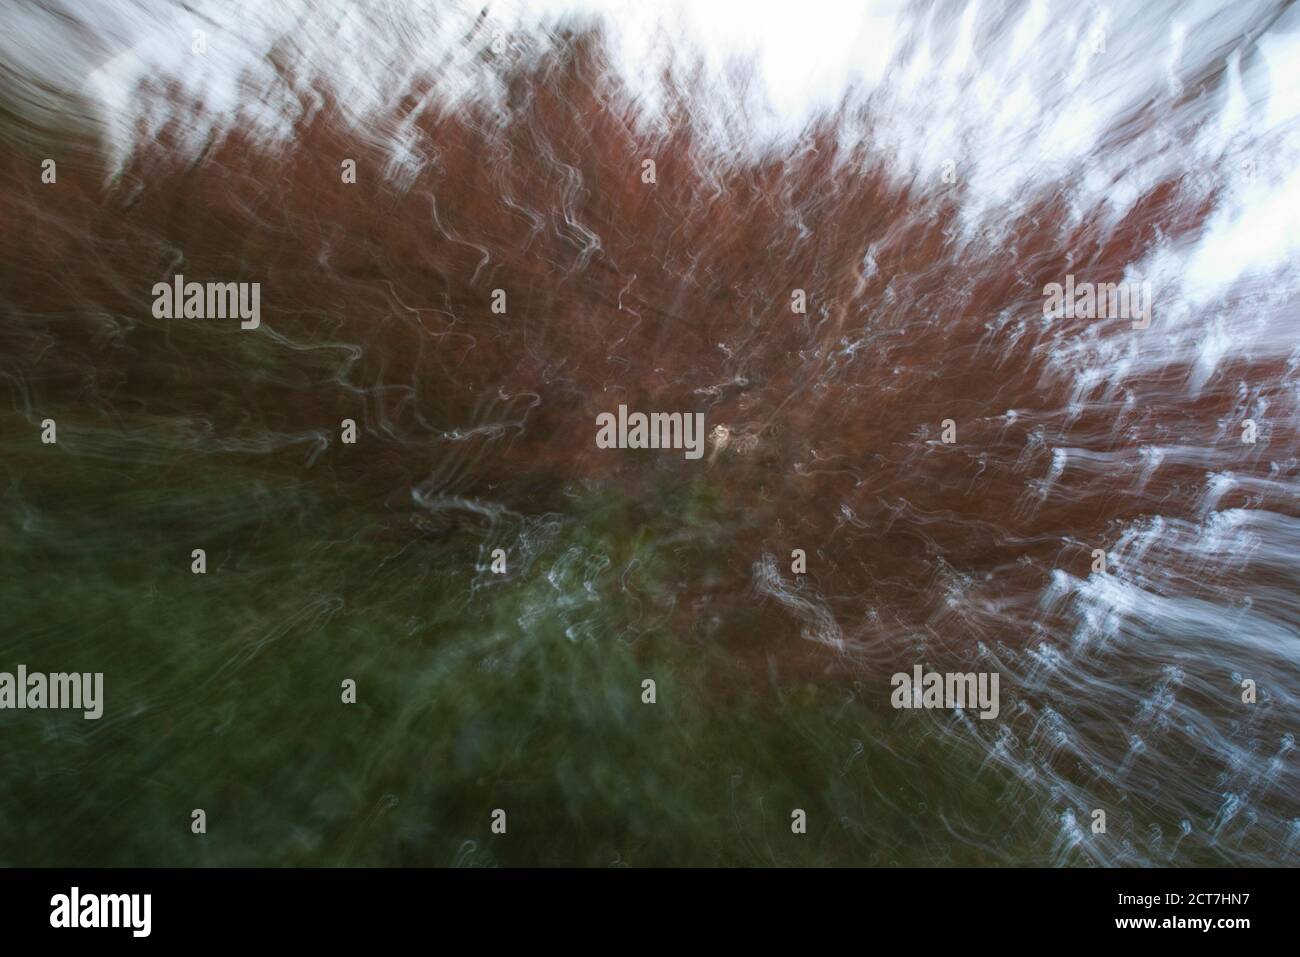 Intentional camera movement image of trees with patches of green and brown. Stock Photo